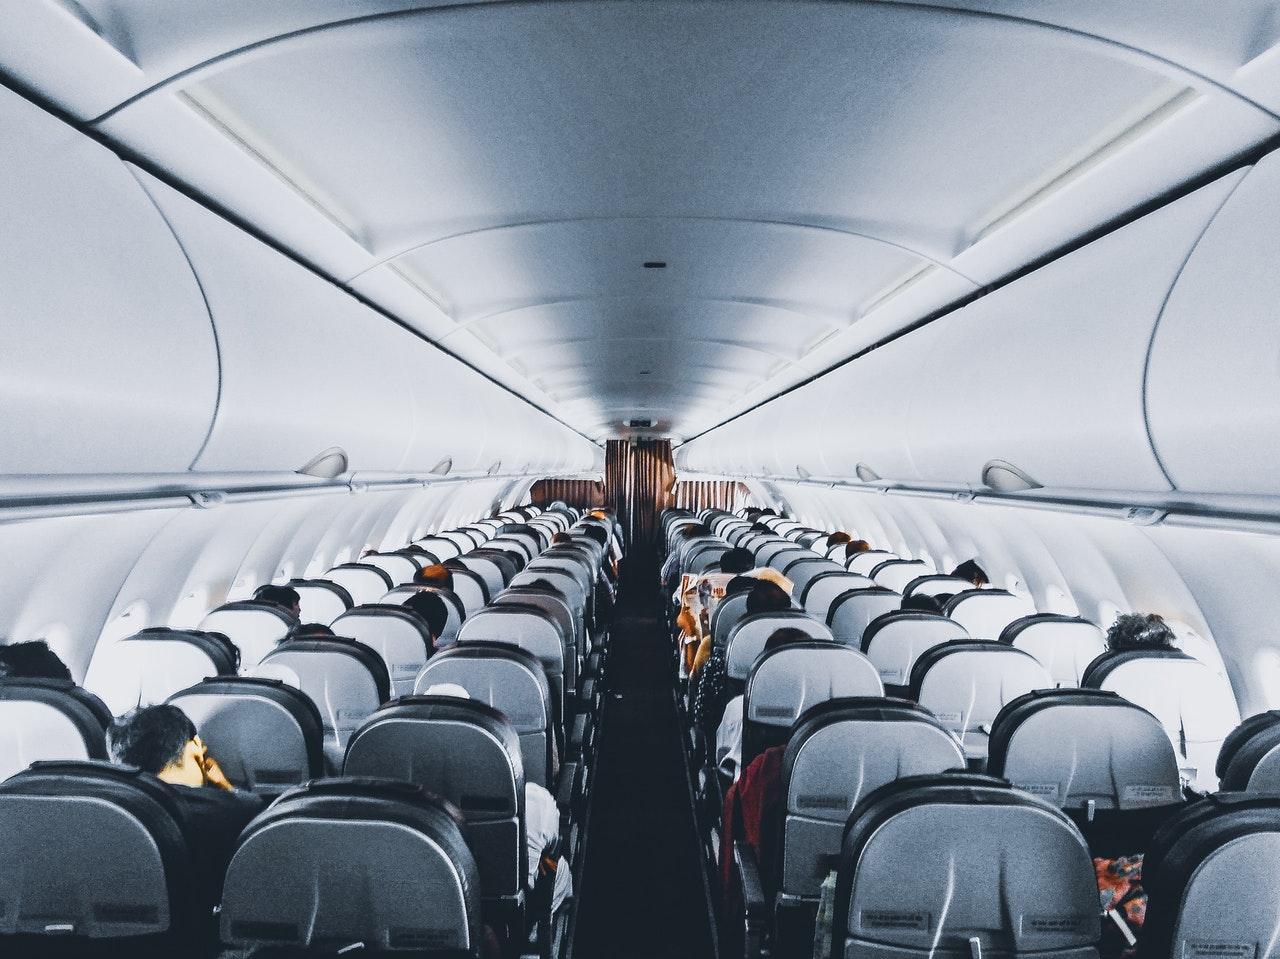 For confidentiality reasons, the woman’s identity, the airline she was travelling on and other details have not been released. Photo: Pexels